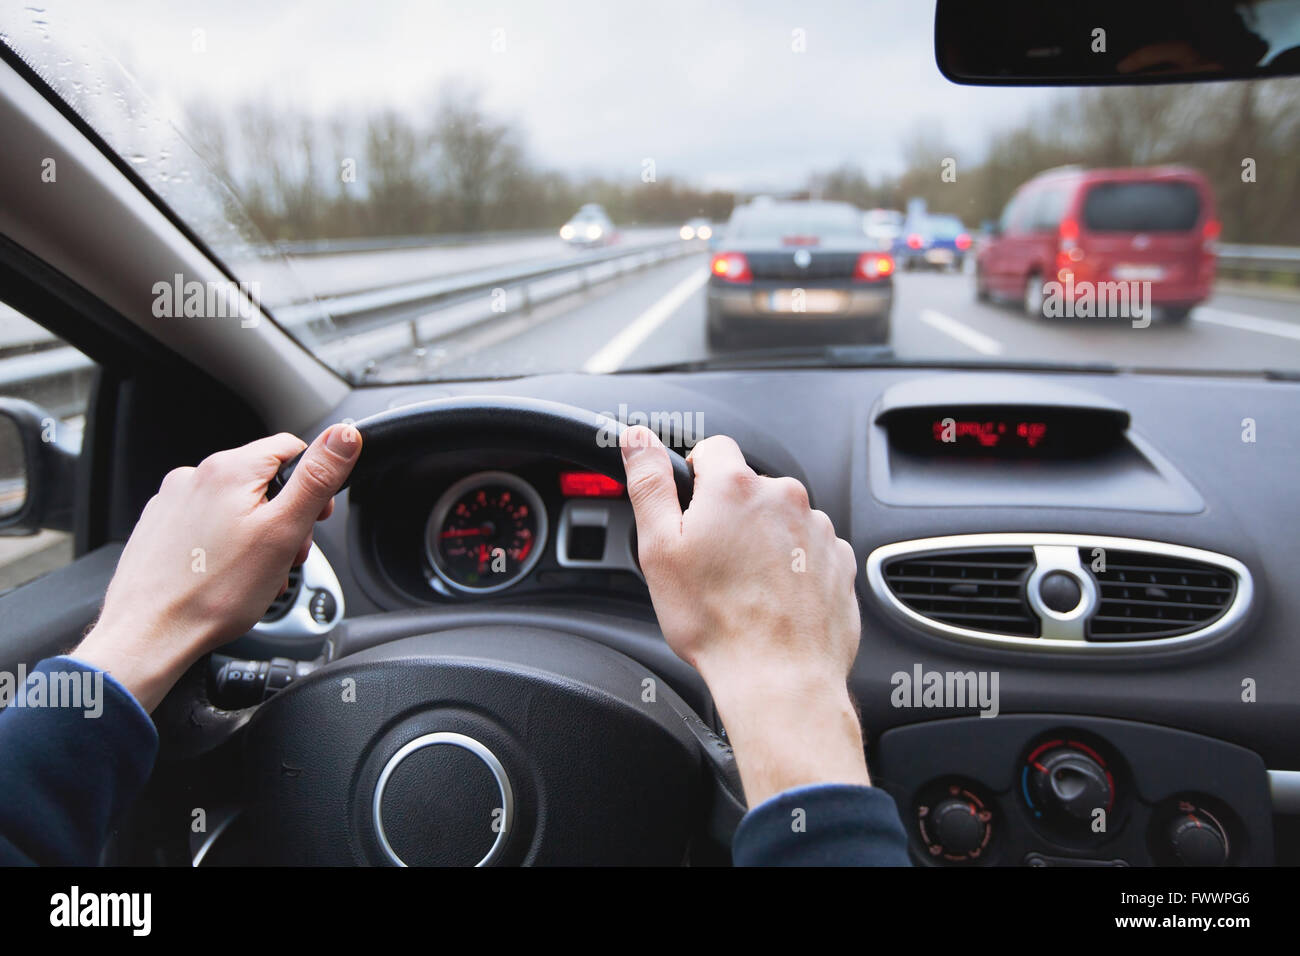 driving car on highway, close up of hands on steering wheel Stock Photo